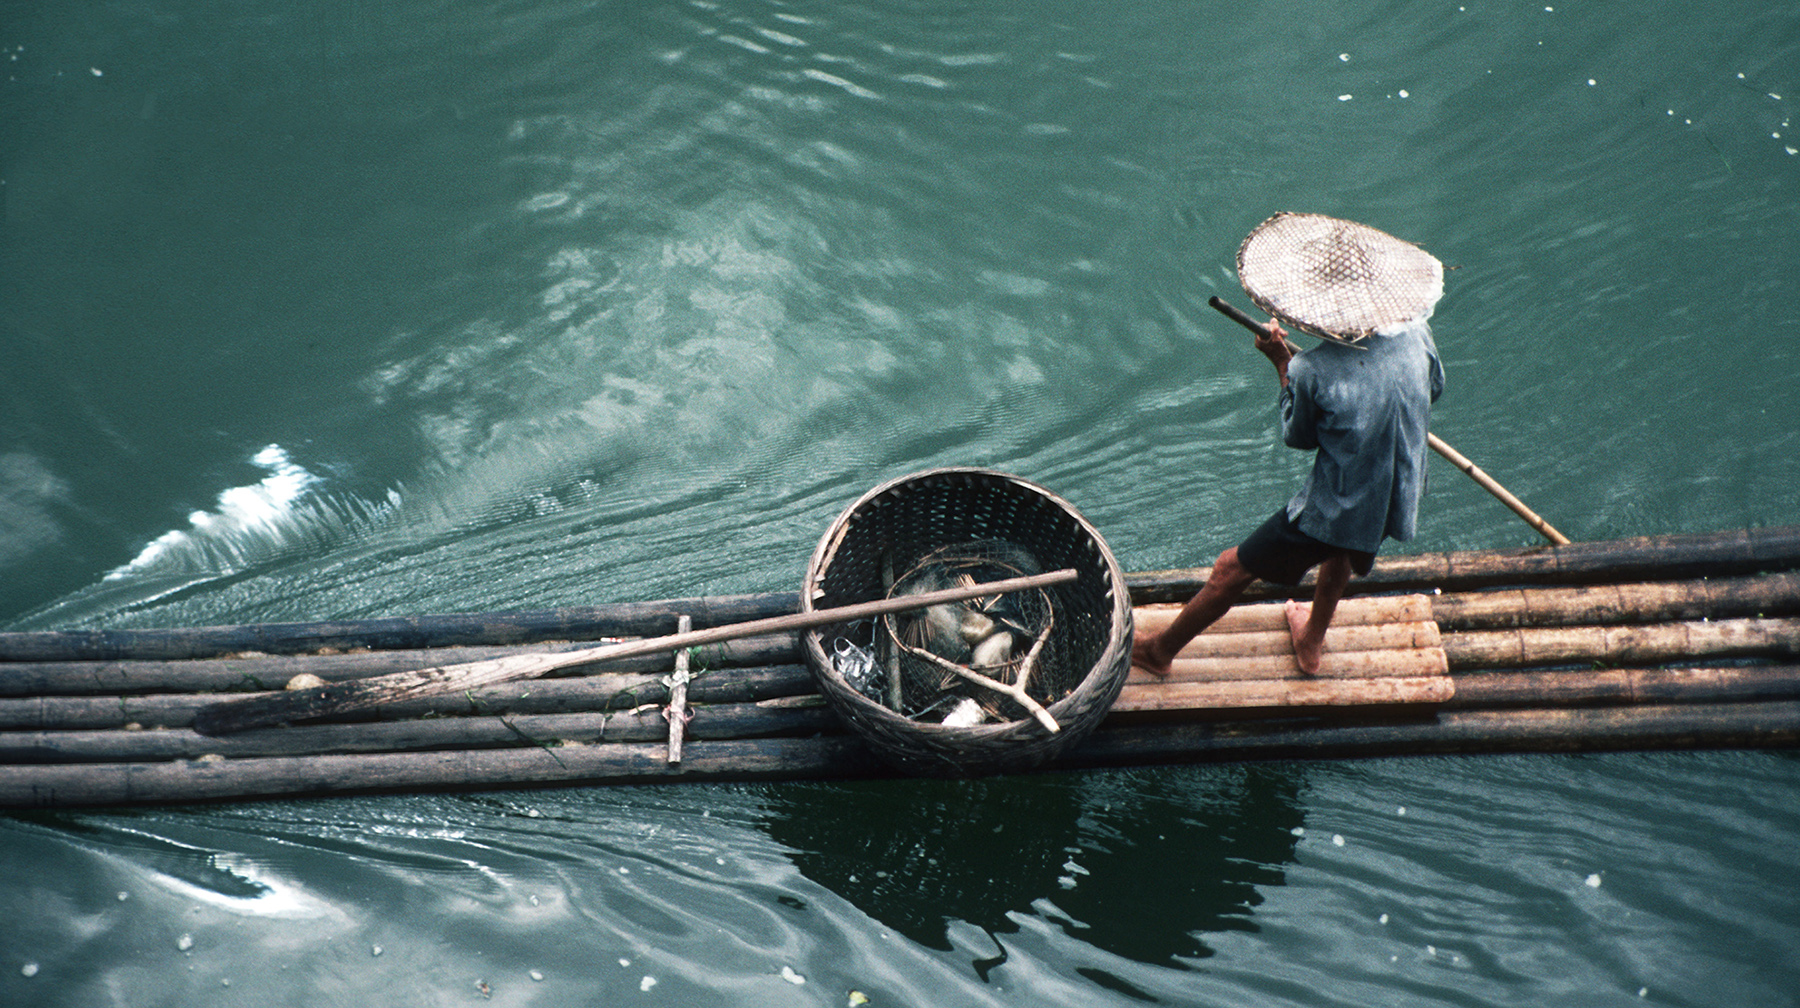 Sonia Costa_The raft, Guilin China